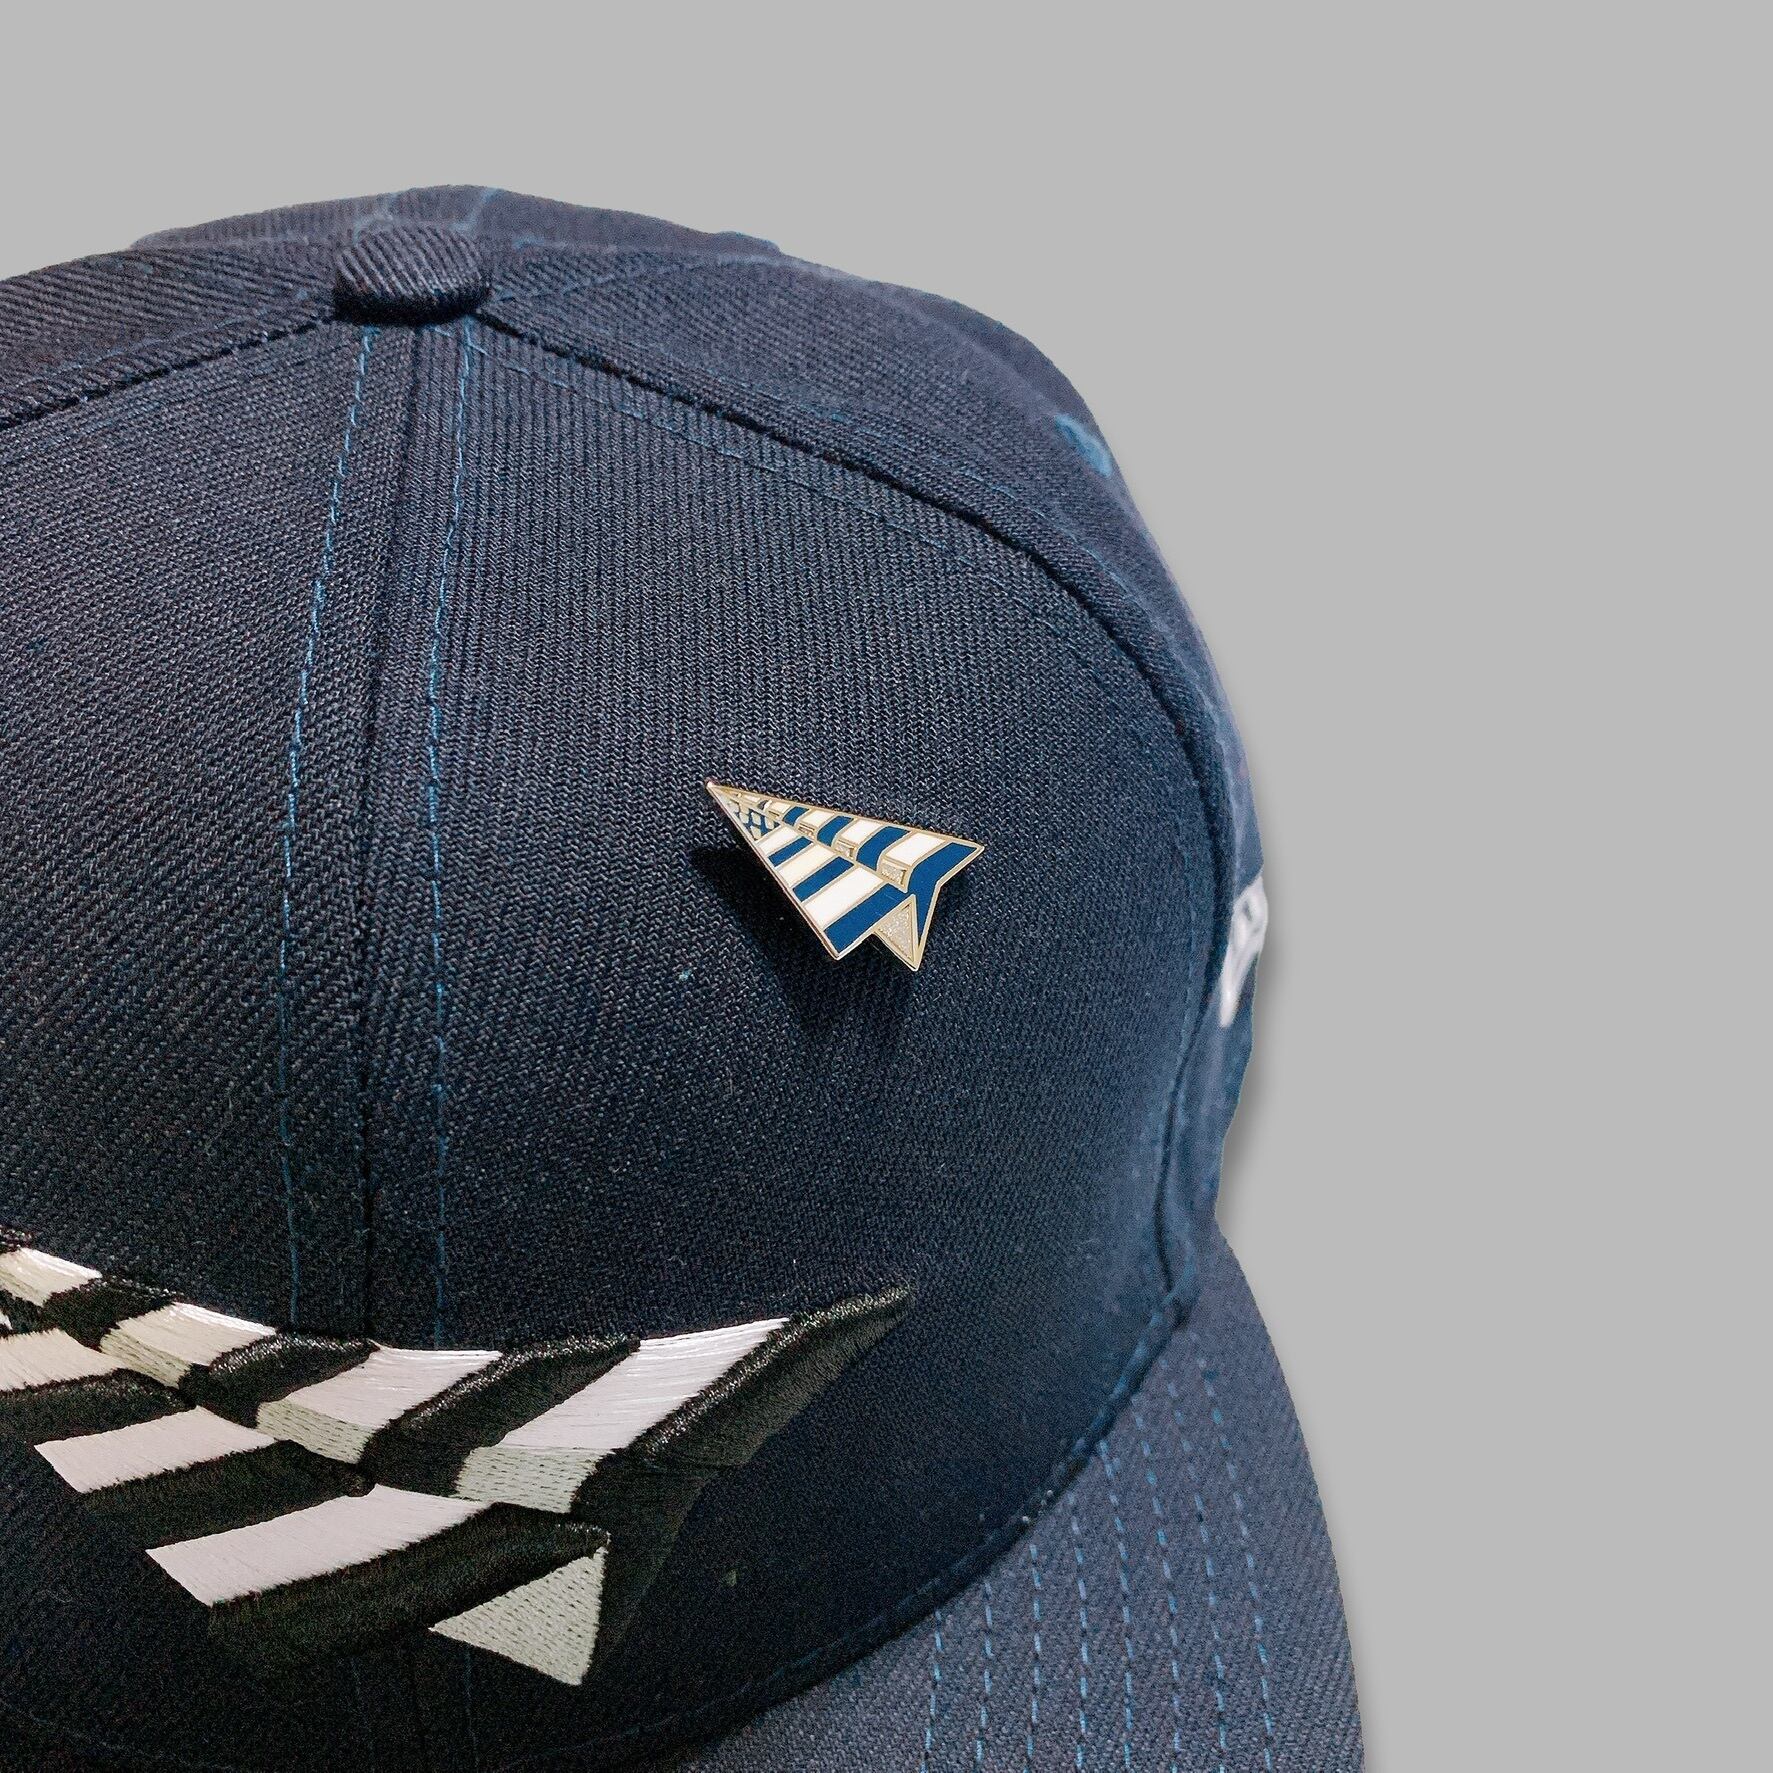 PAPER PLANES / ROC NATION - NAVY BOY CROWN FITTED CAP (NEW ERA ...